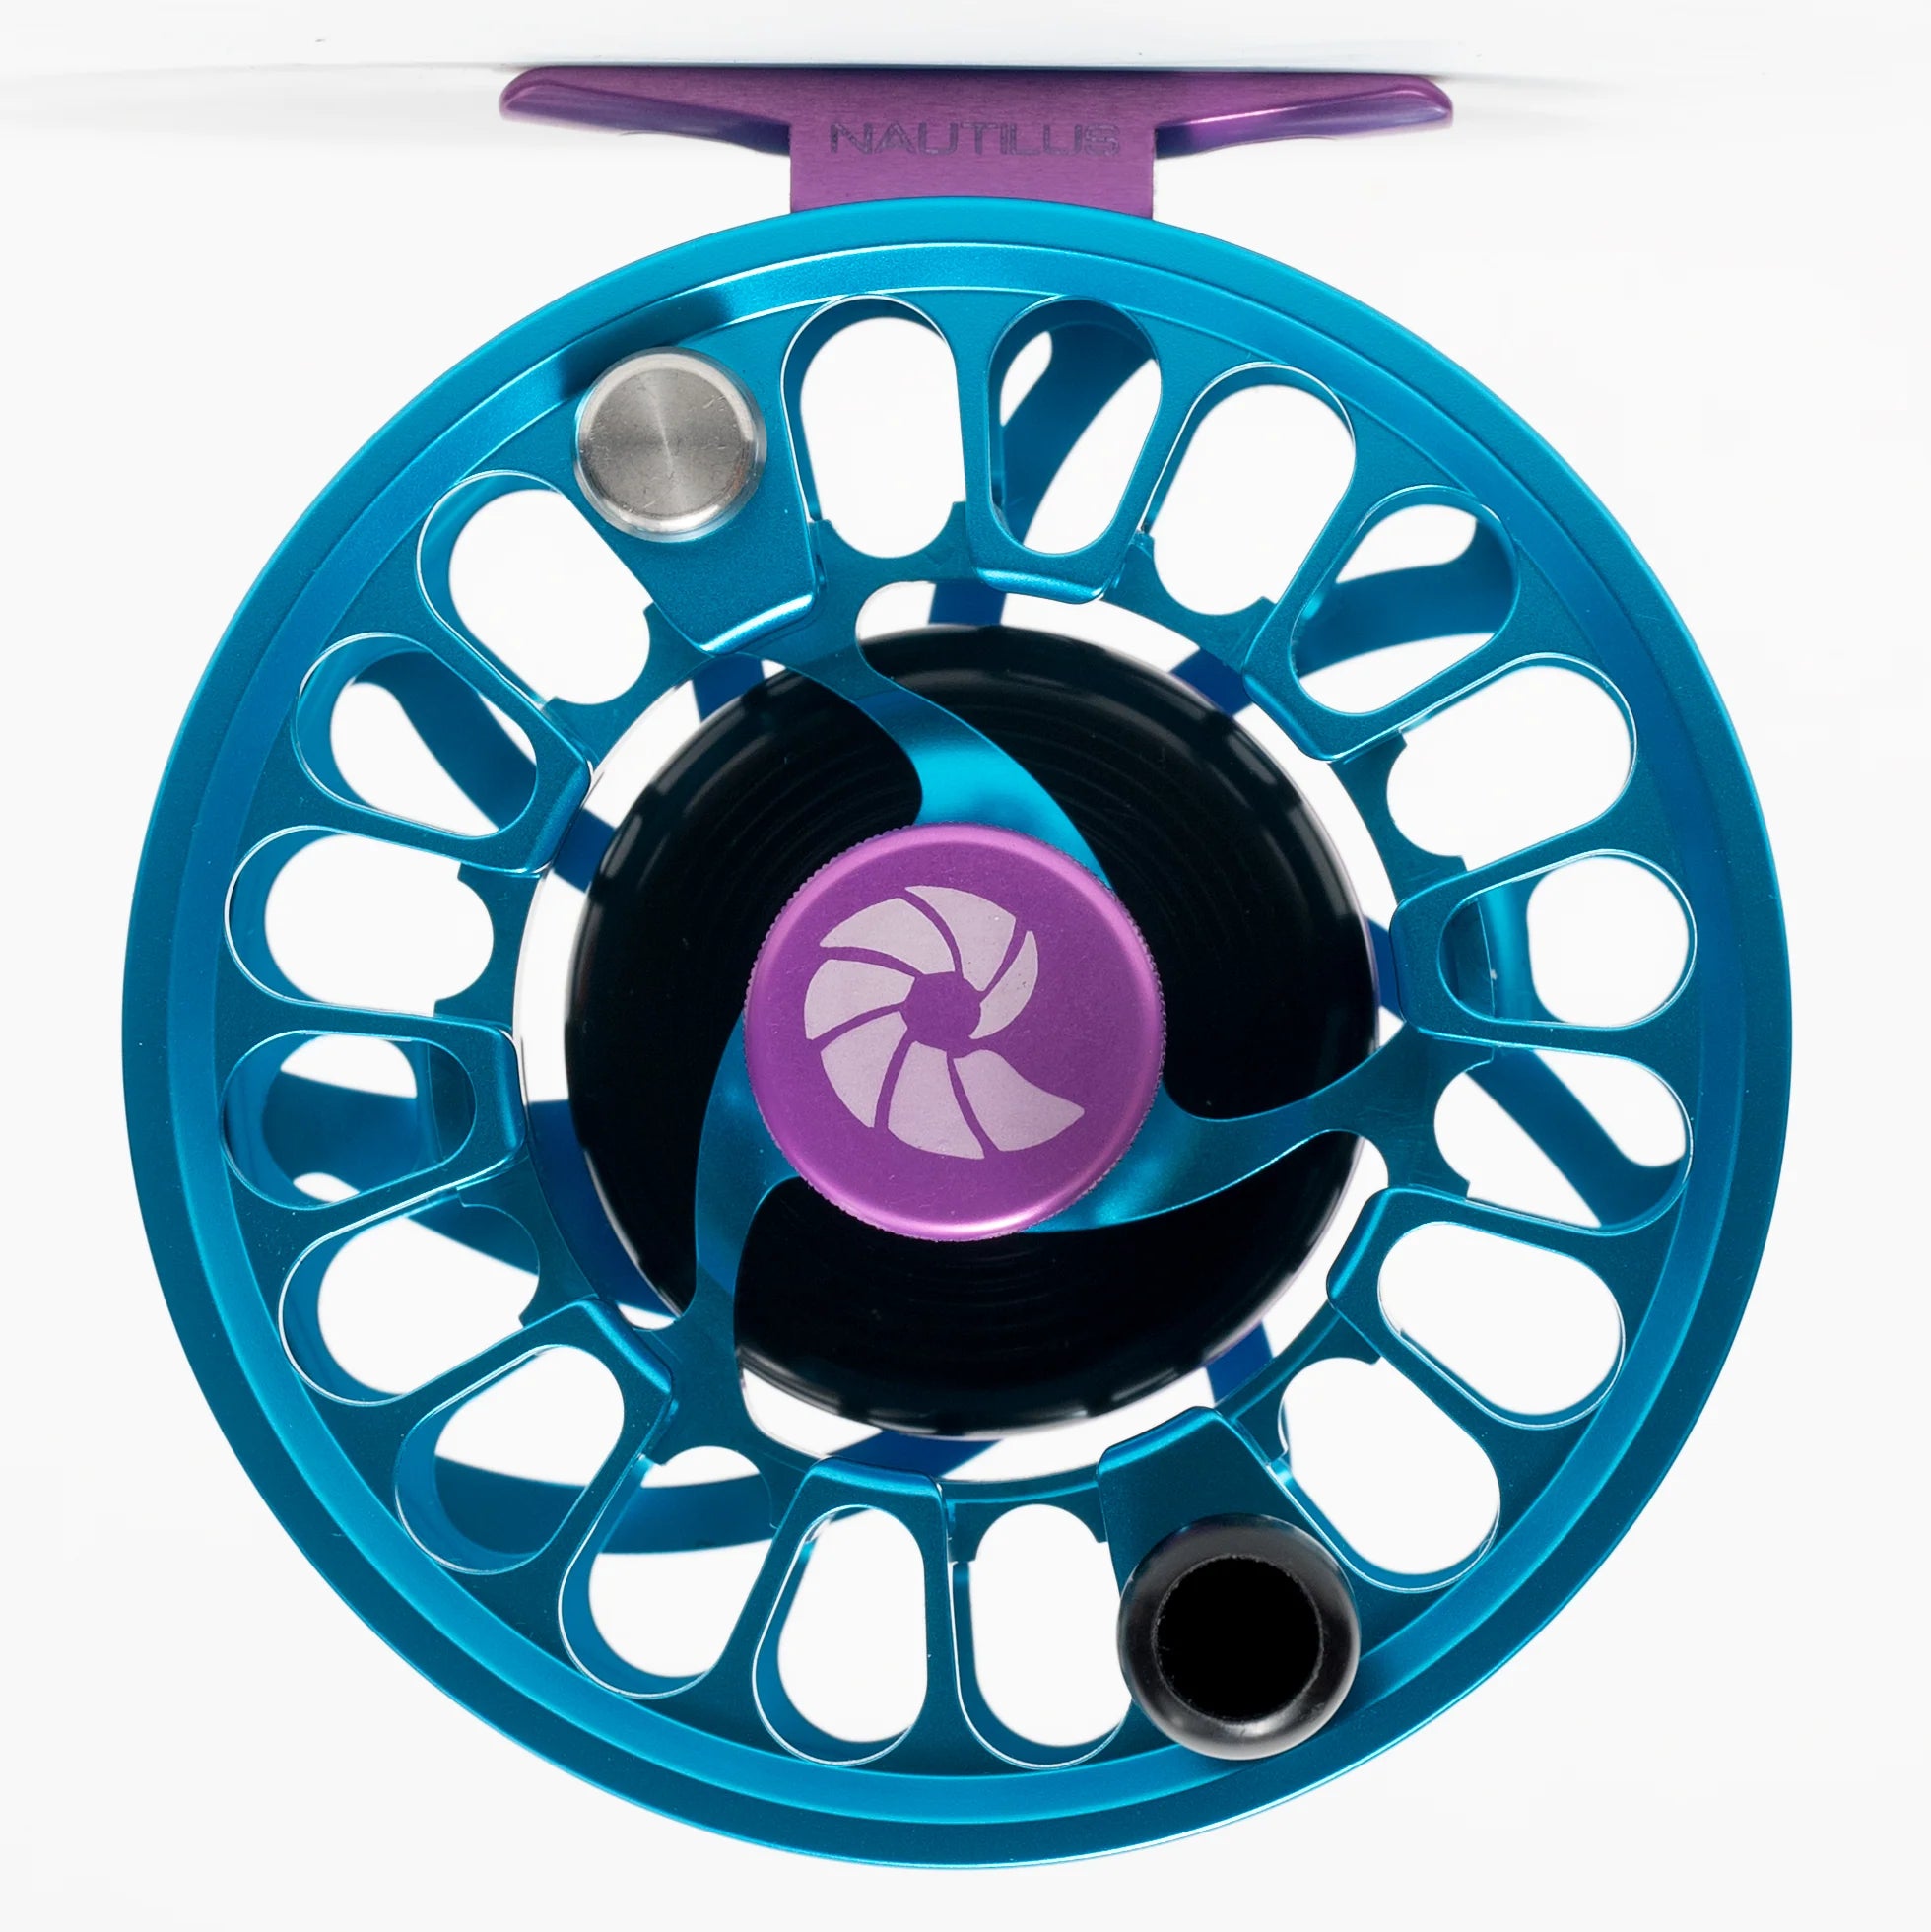 Nautilus NV-G Turquoise 8/9 Fly Reel - Full Custom with Violet/Purple color accent parts